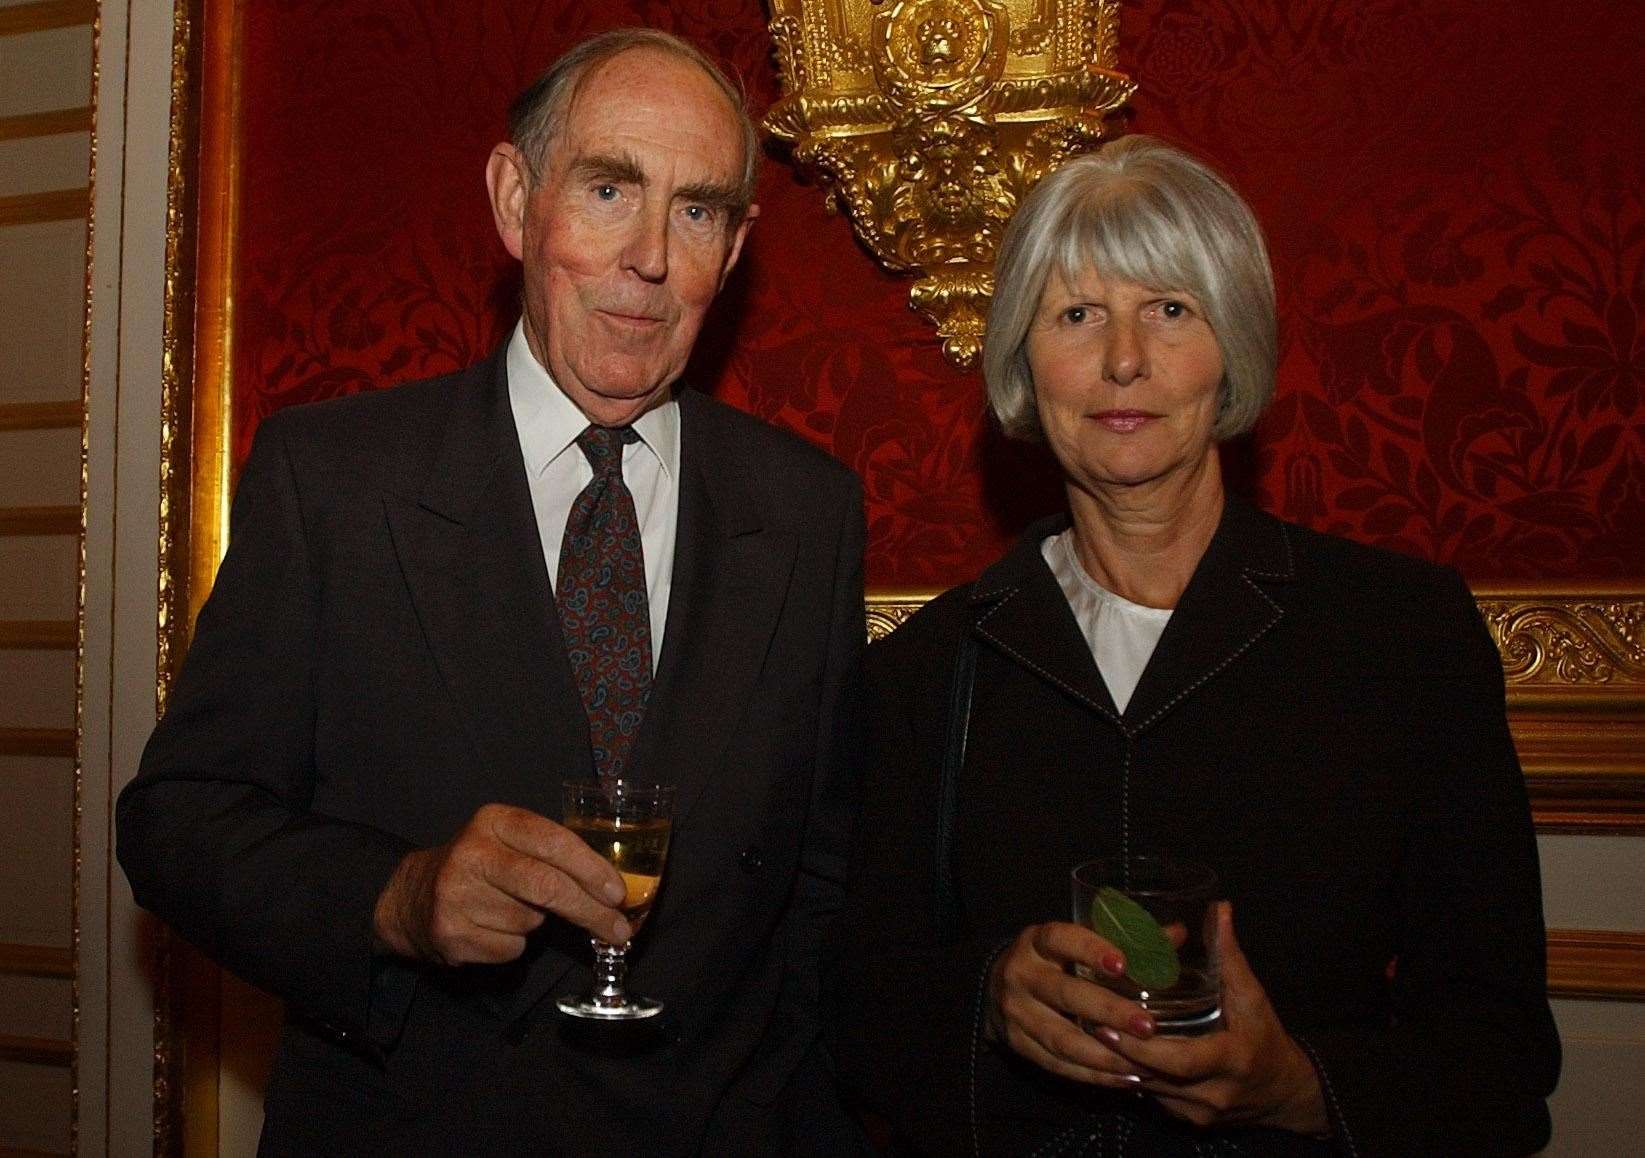 Lord Brooke of Sutton Mandeville and Lady Brooke at St James’s Palace (PA)